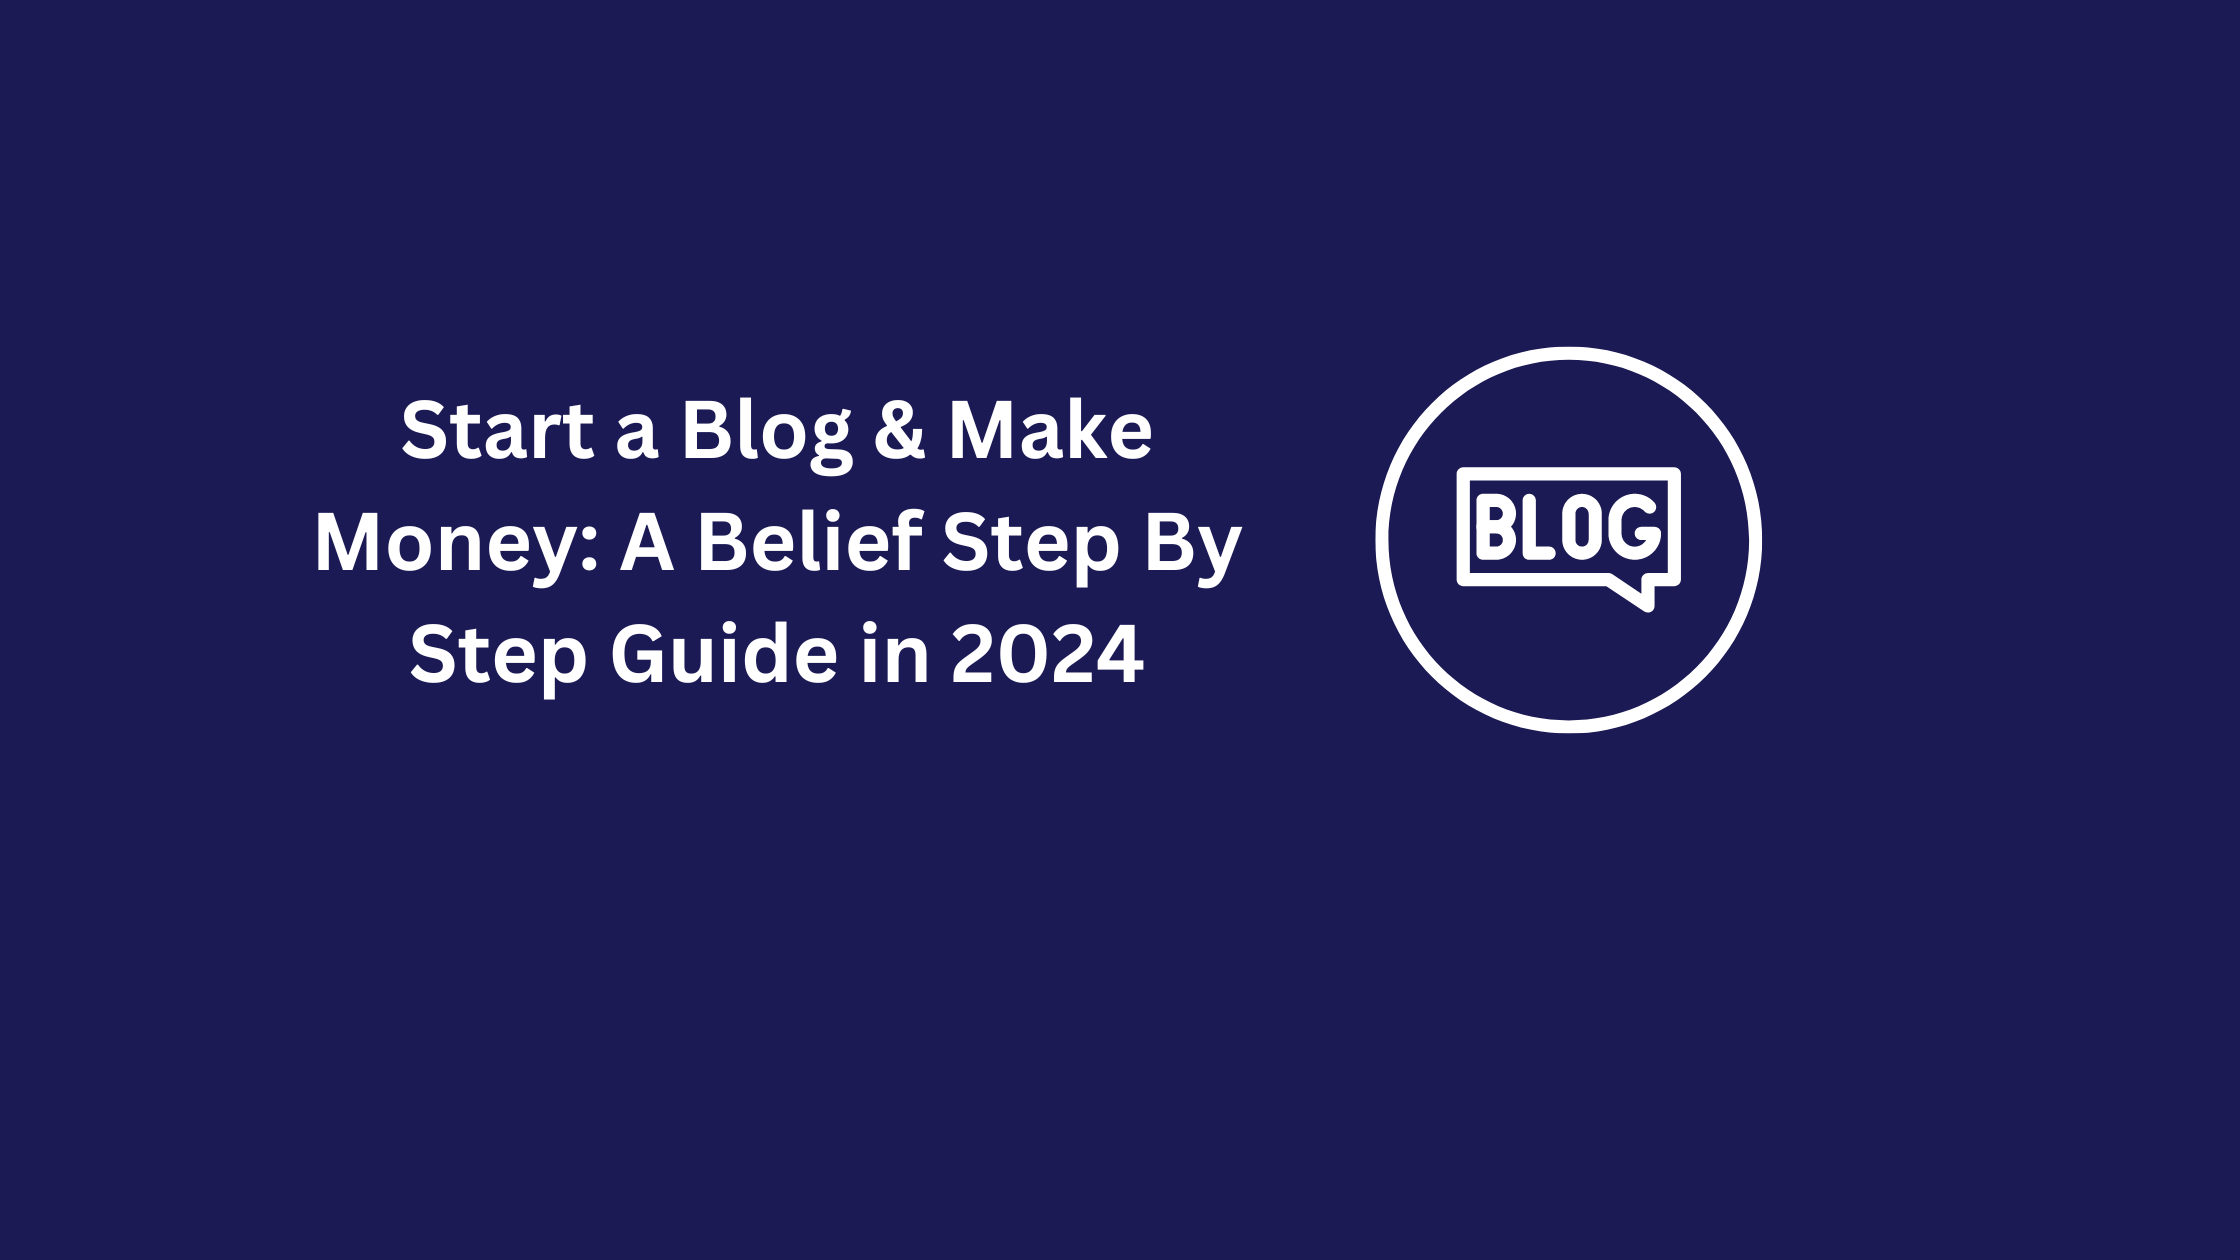 Start a Blog & Make Money: A Belief Step By Step Guide in 2024